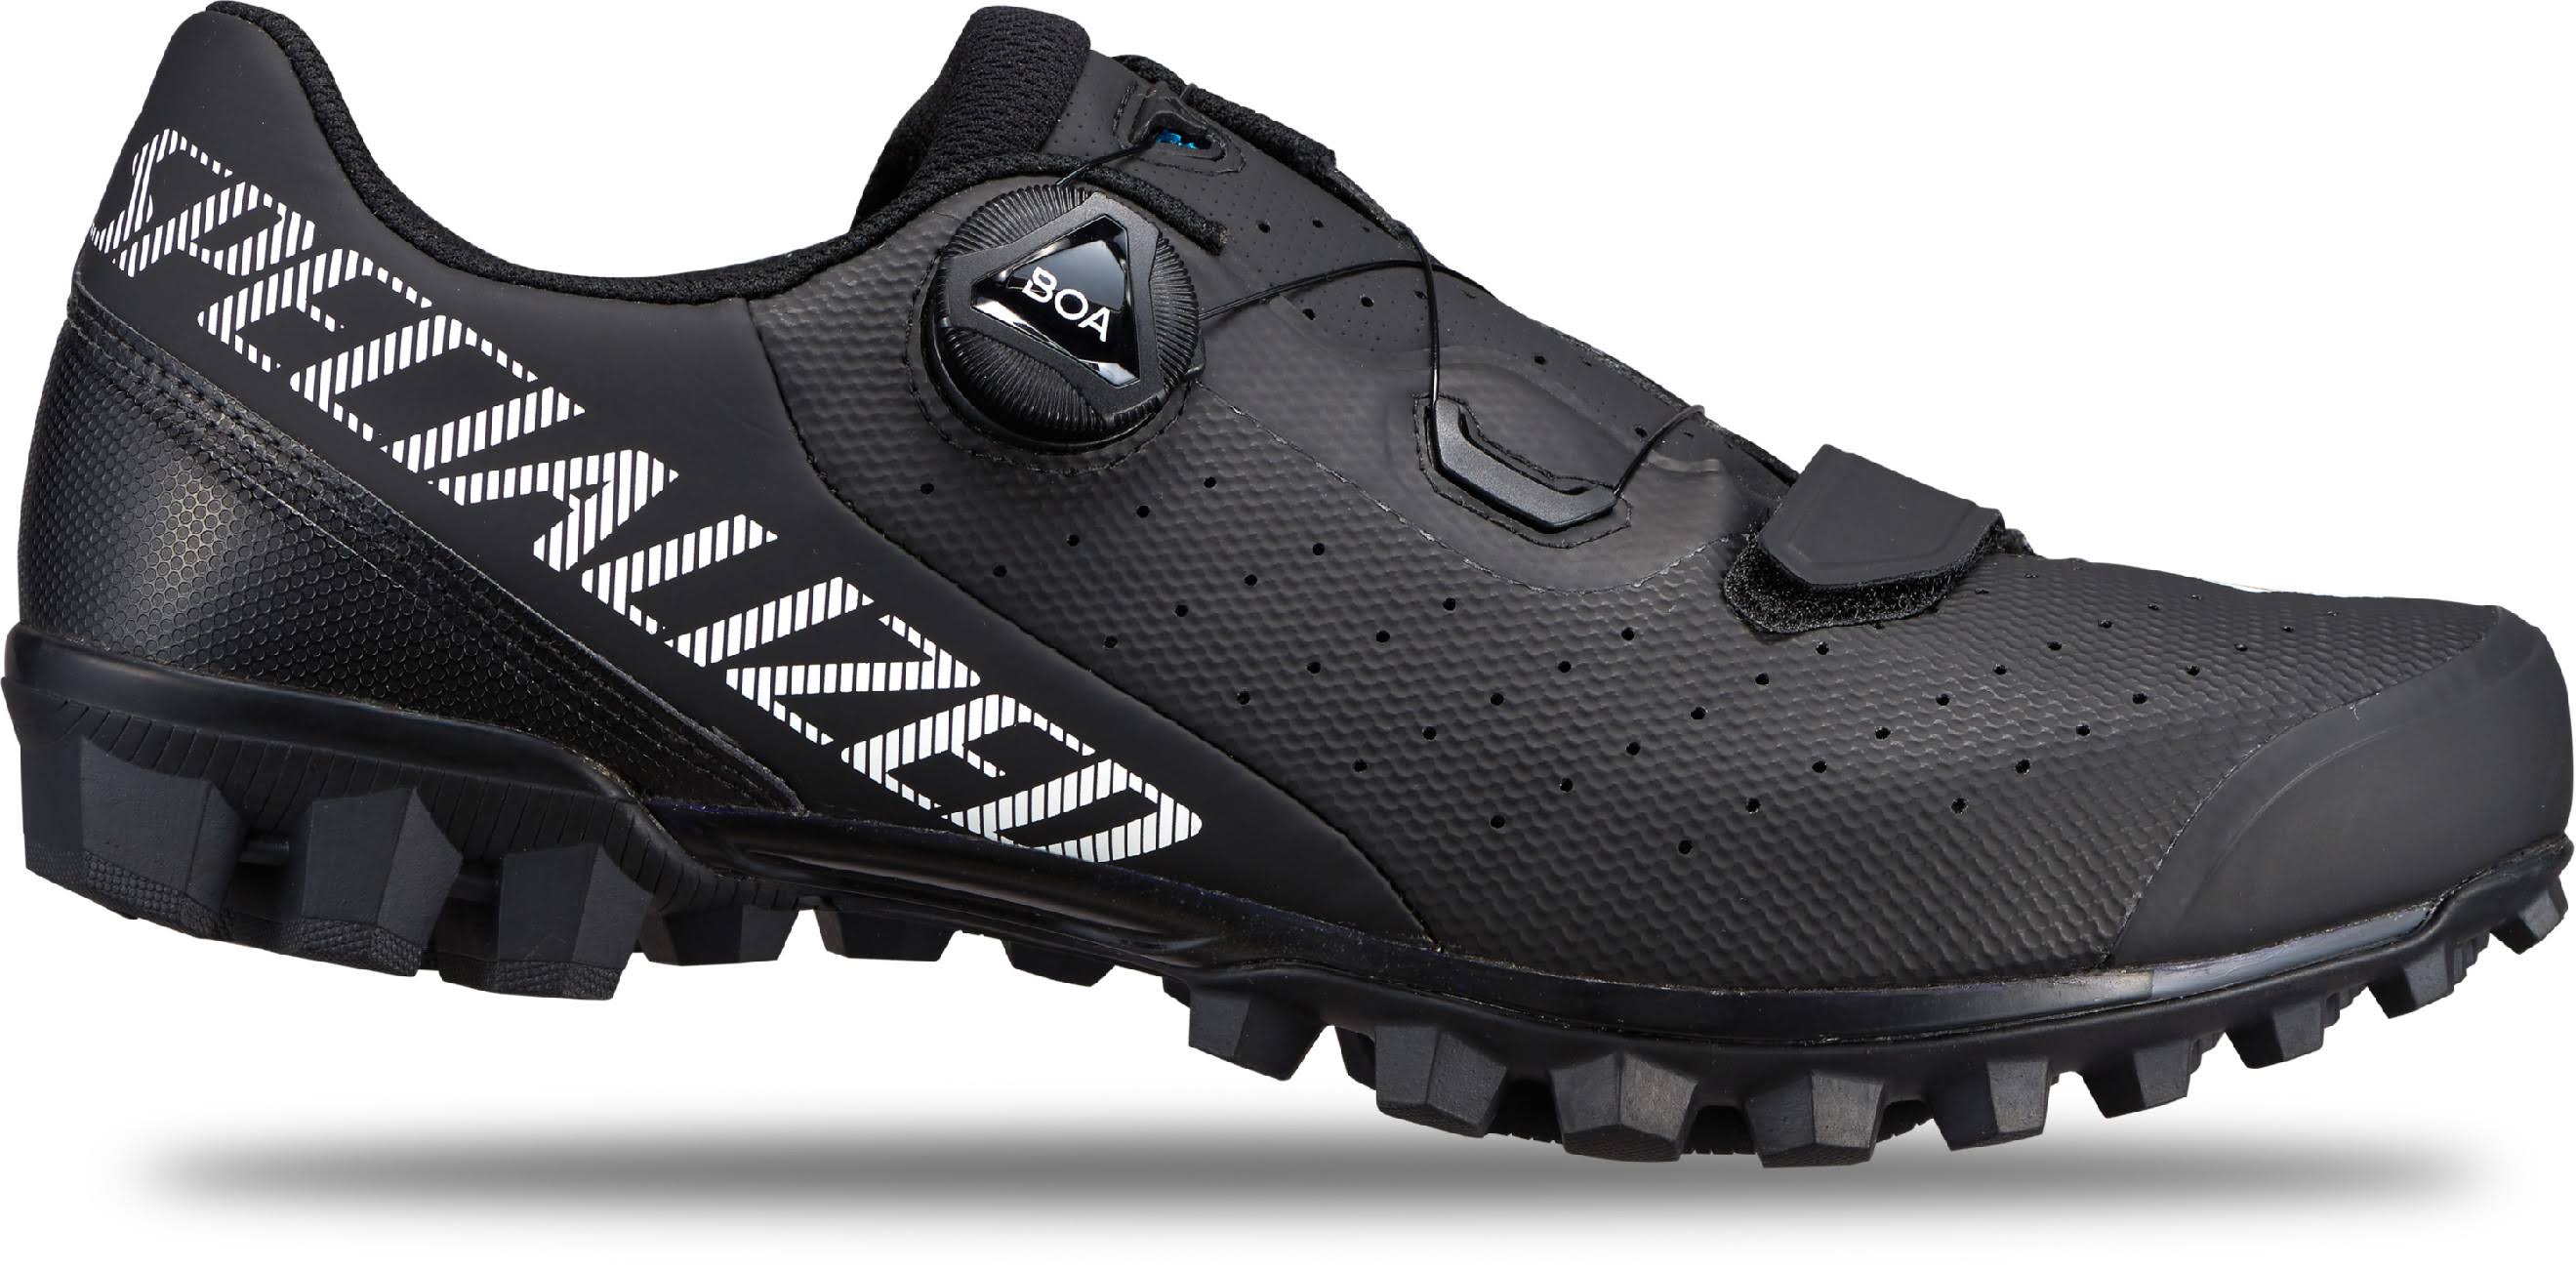 Specialized Recon 2.0 Mountain Bike Shoes - Black - 40.5